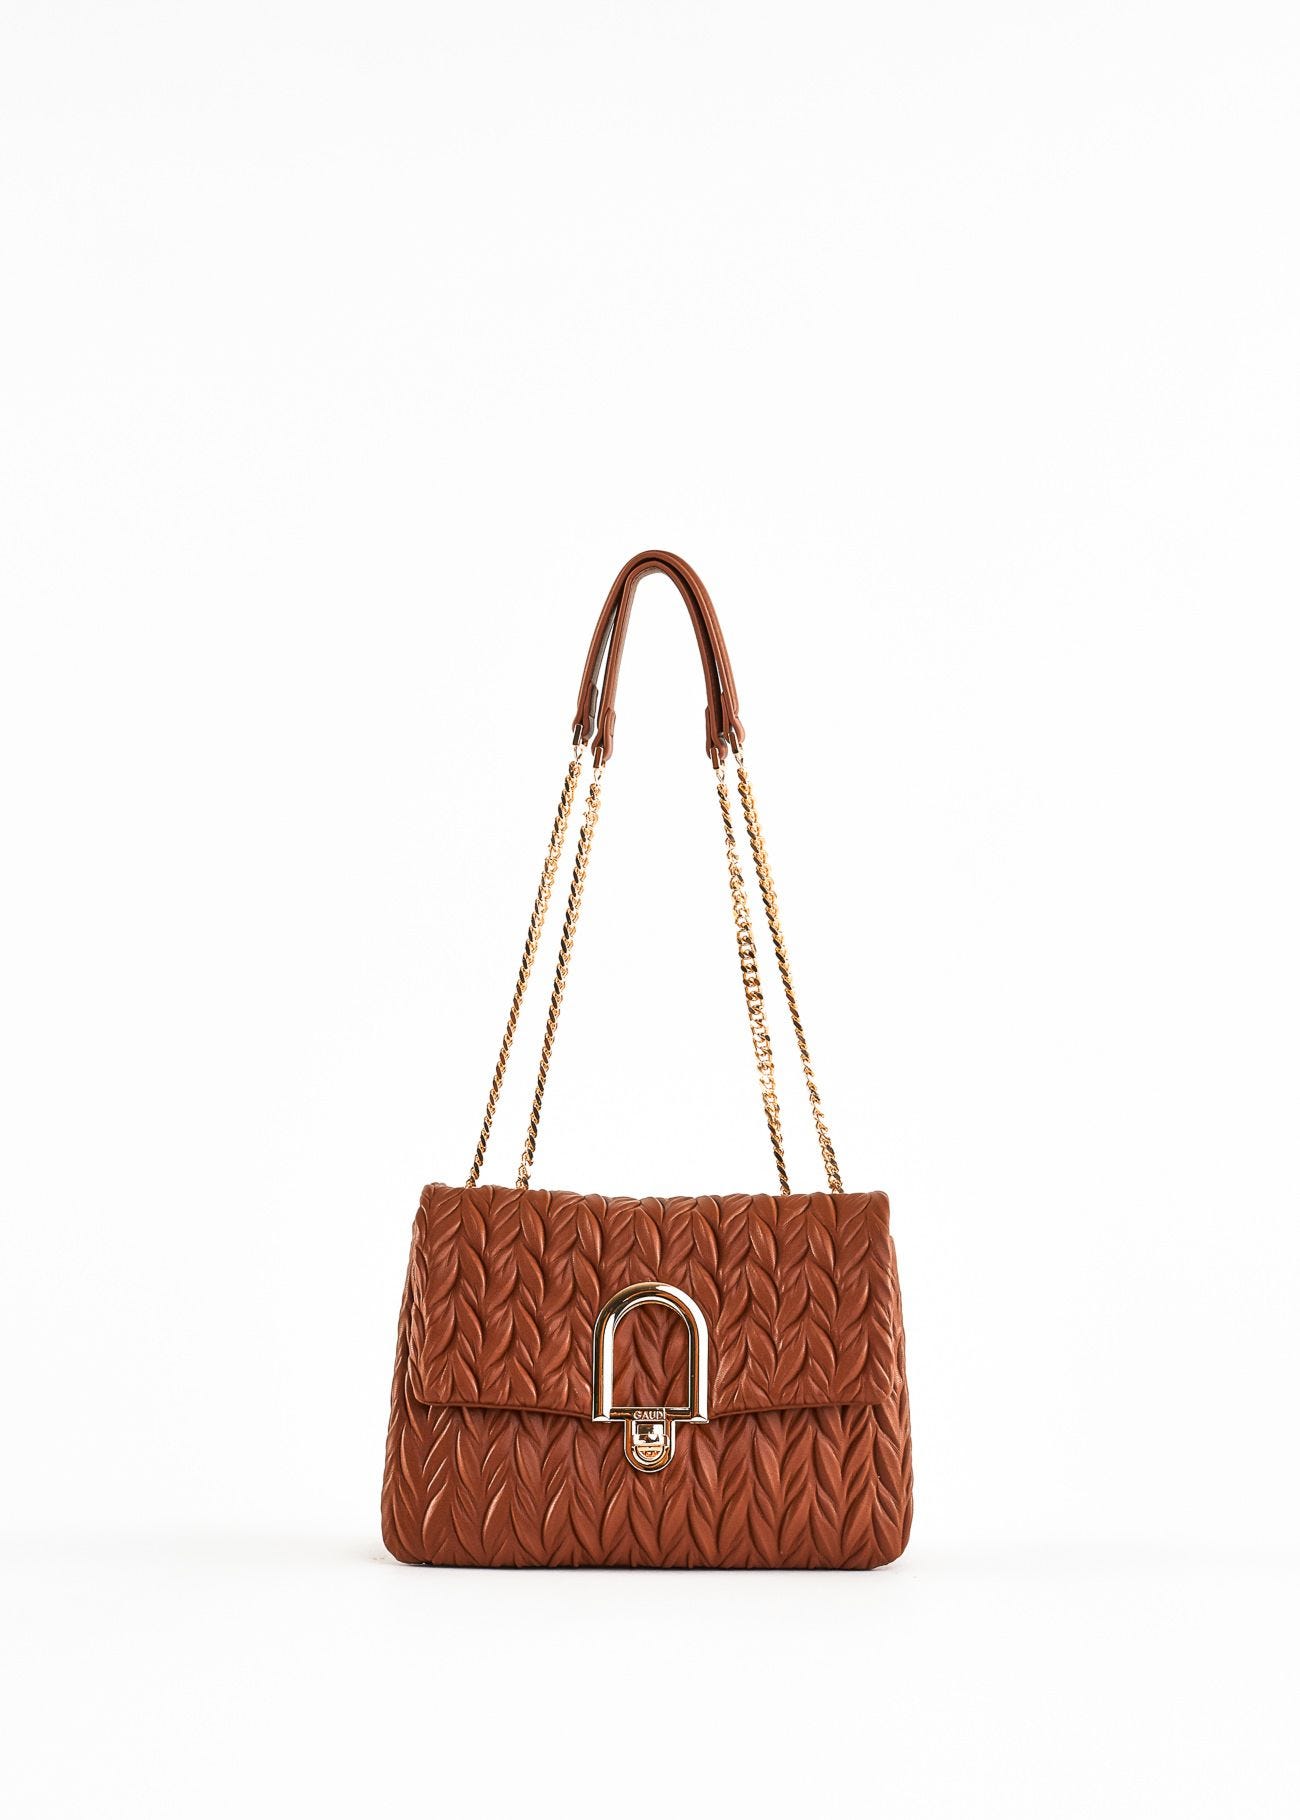 Bag with chain shoulder strap